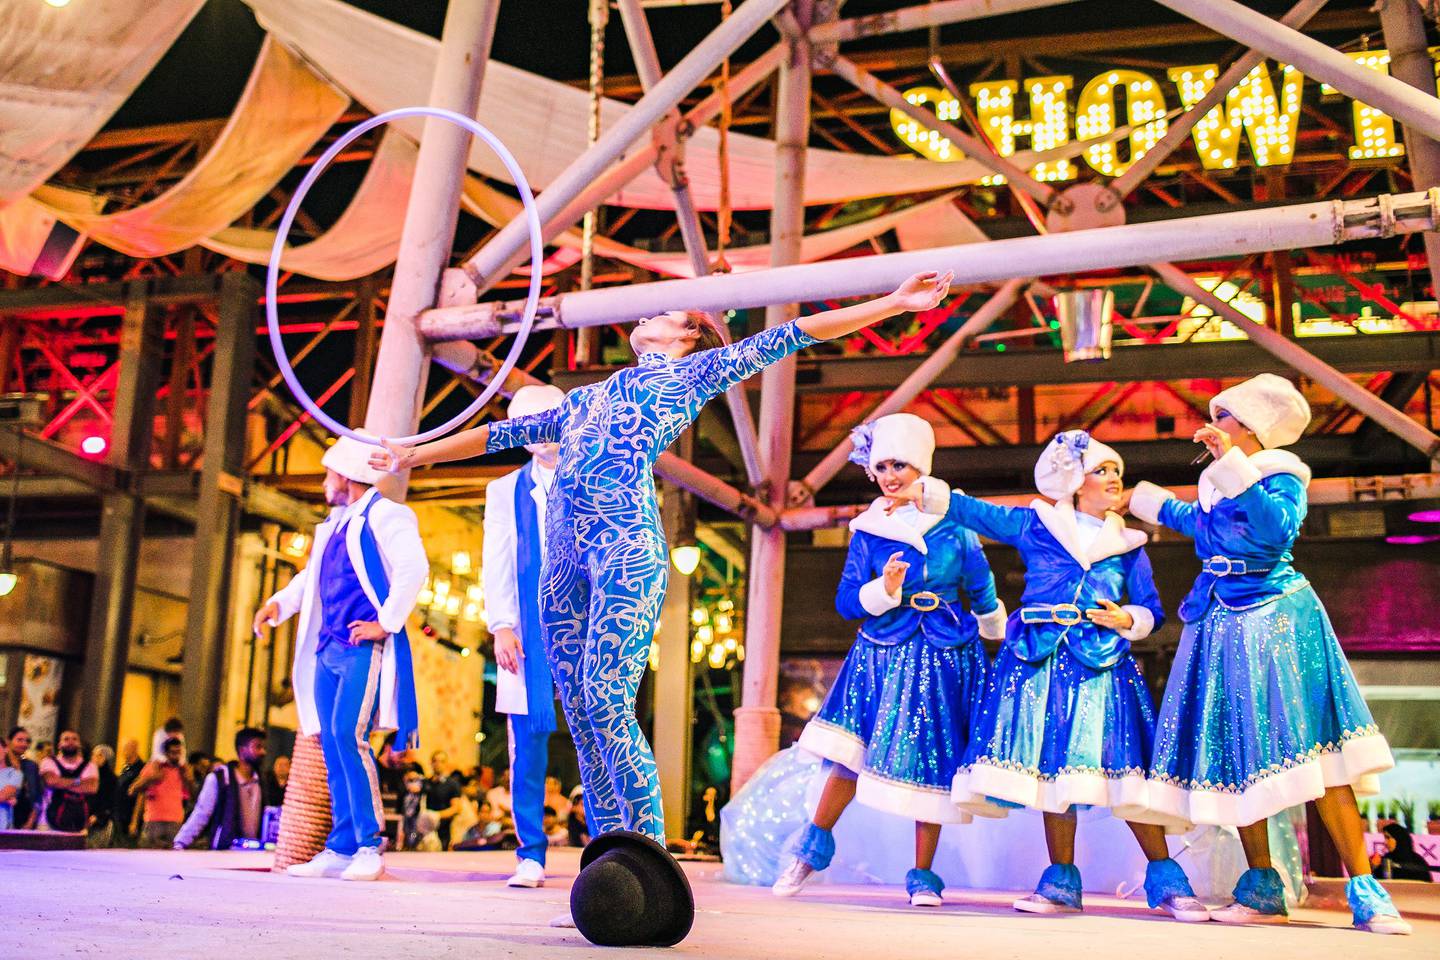 There will be twice daily festive street parades through La Mer followed by a stage show with acrobats and performers. Photo: Meraas